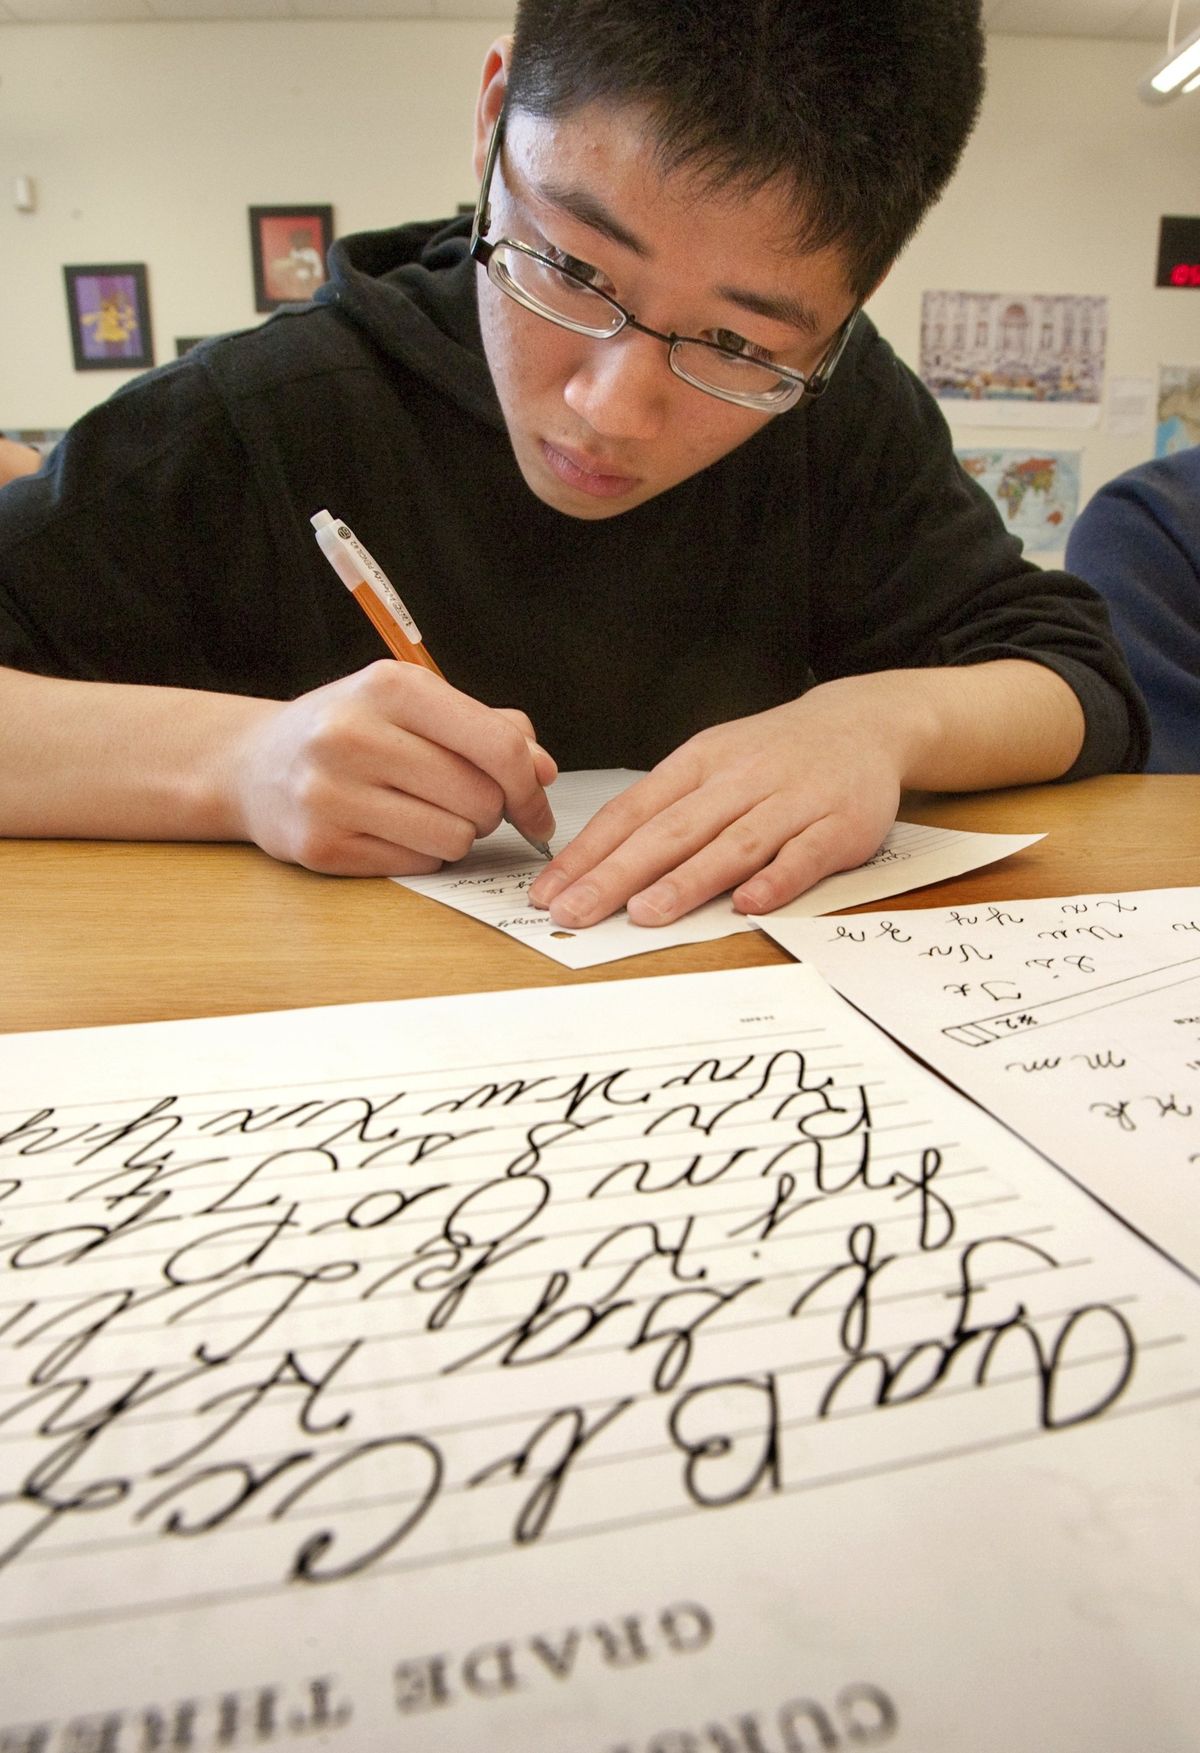 Kevin Tang, a senior at Roosevelt High School, is among the students receiving a one-hour refresher lesson in cursive writing on May 20 in Seattle. Tang  took the refresher at the suggestion of Latin teacher Nora MacDonald.